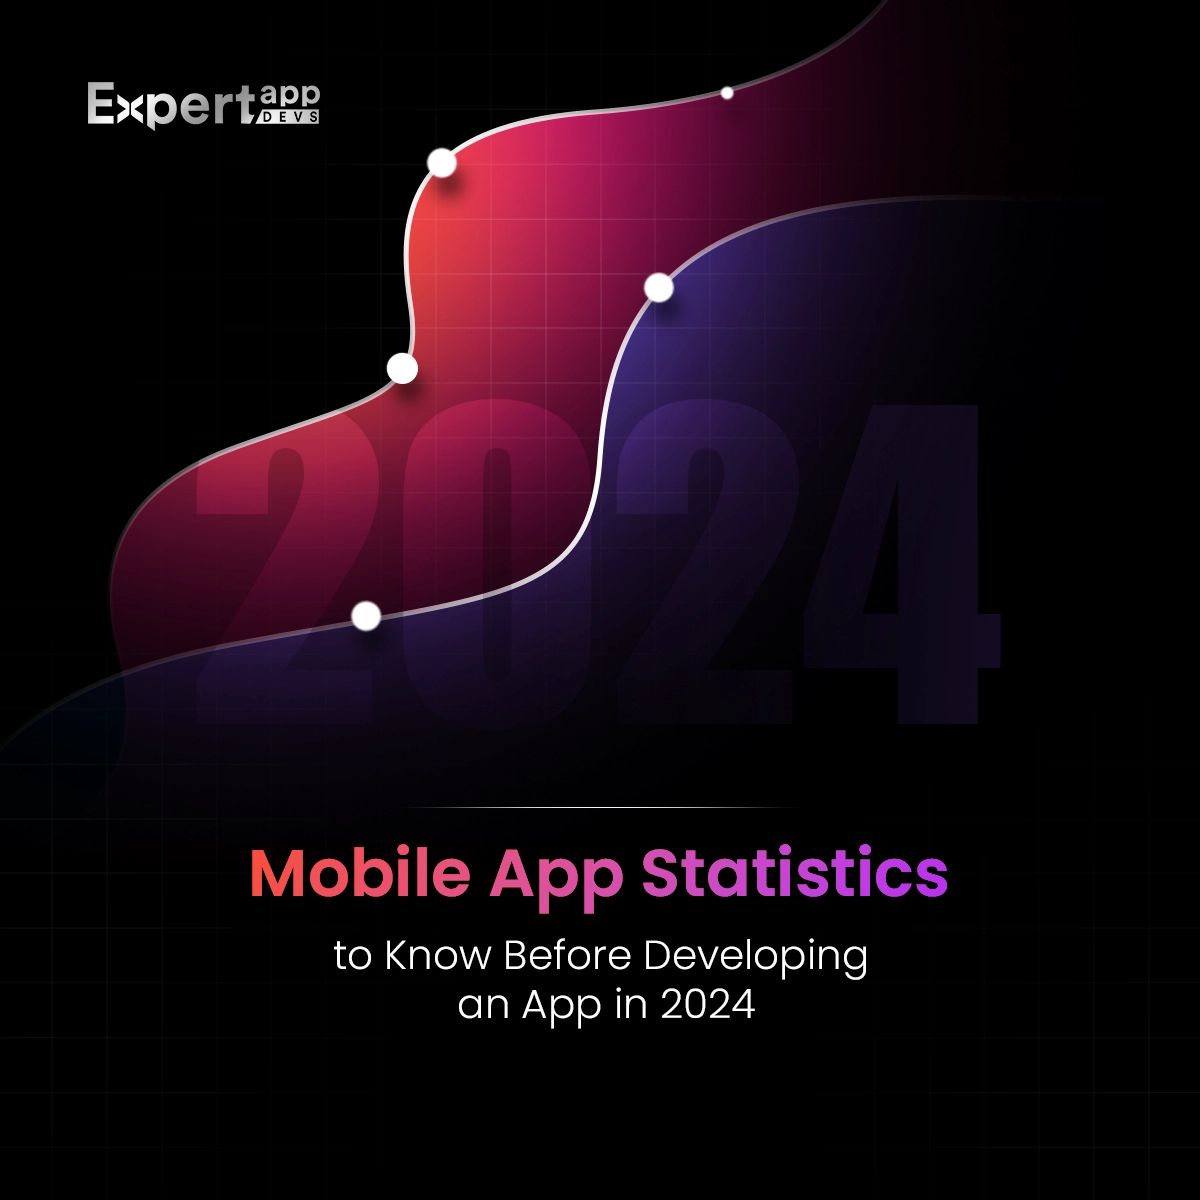 5 Mobile App Statistics to Know Before Developing an App